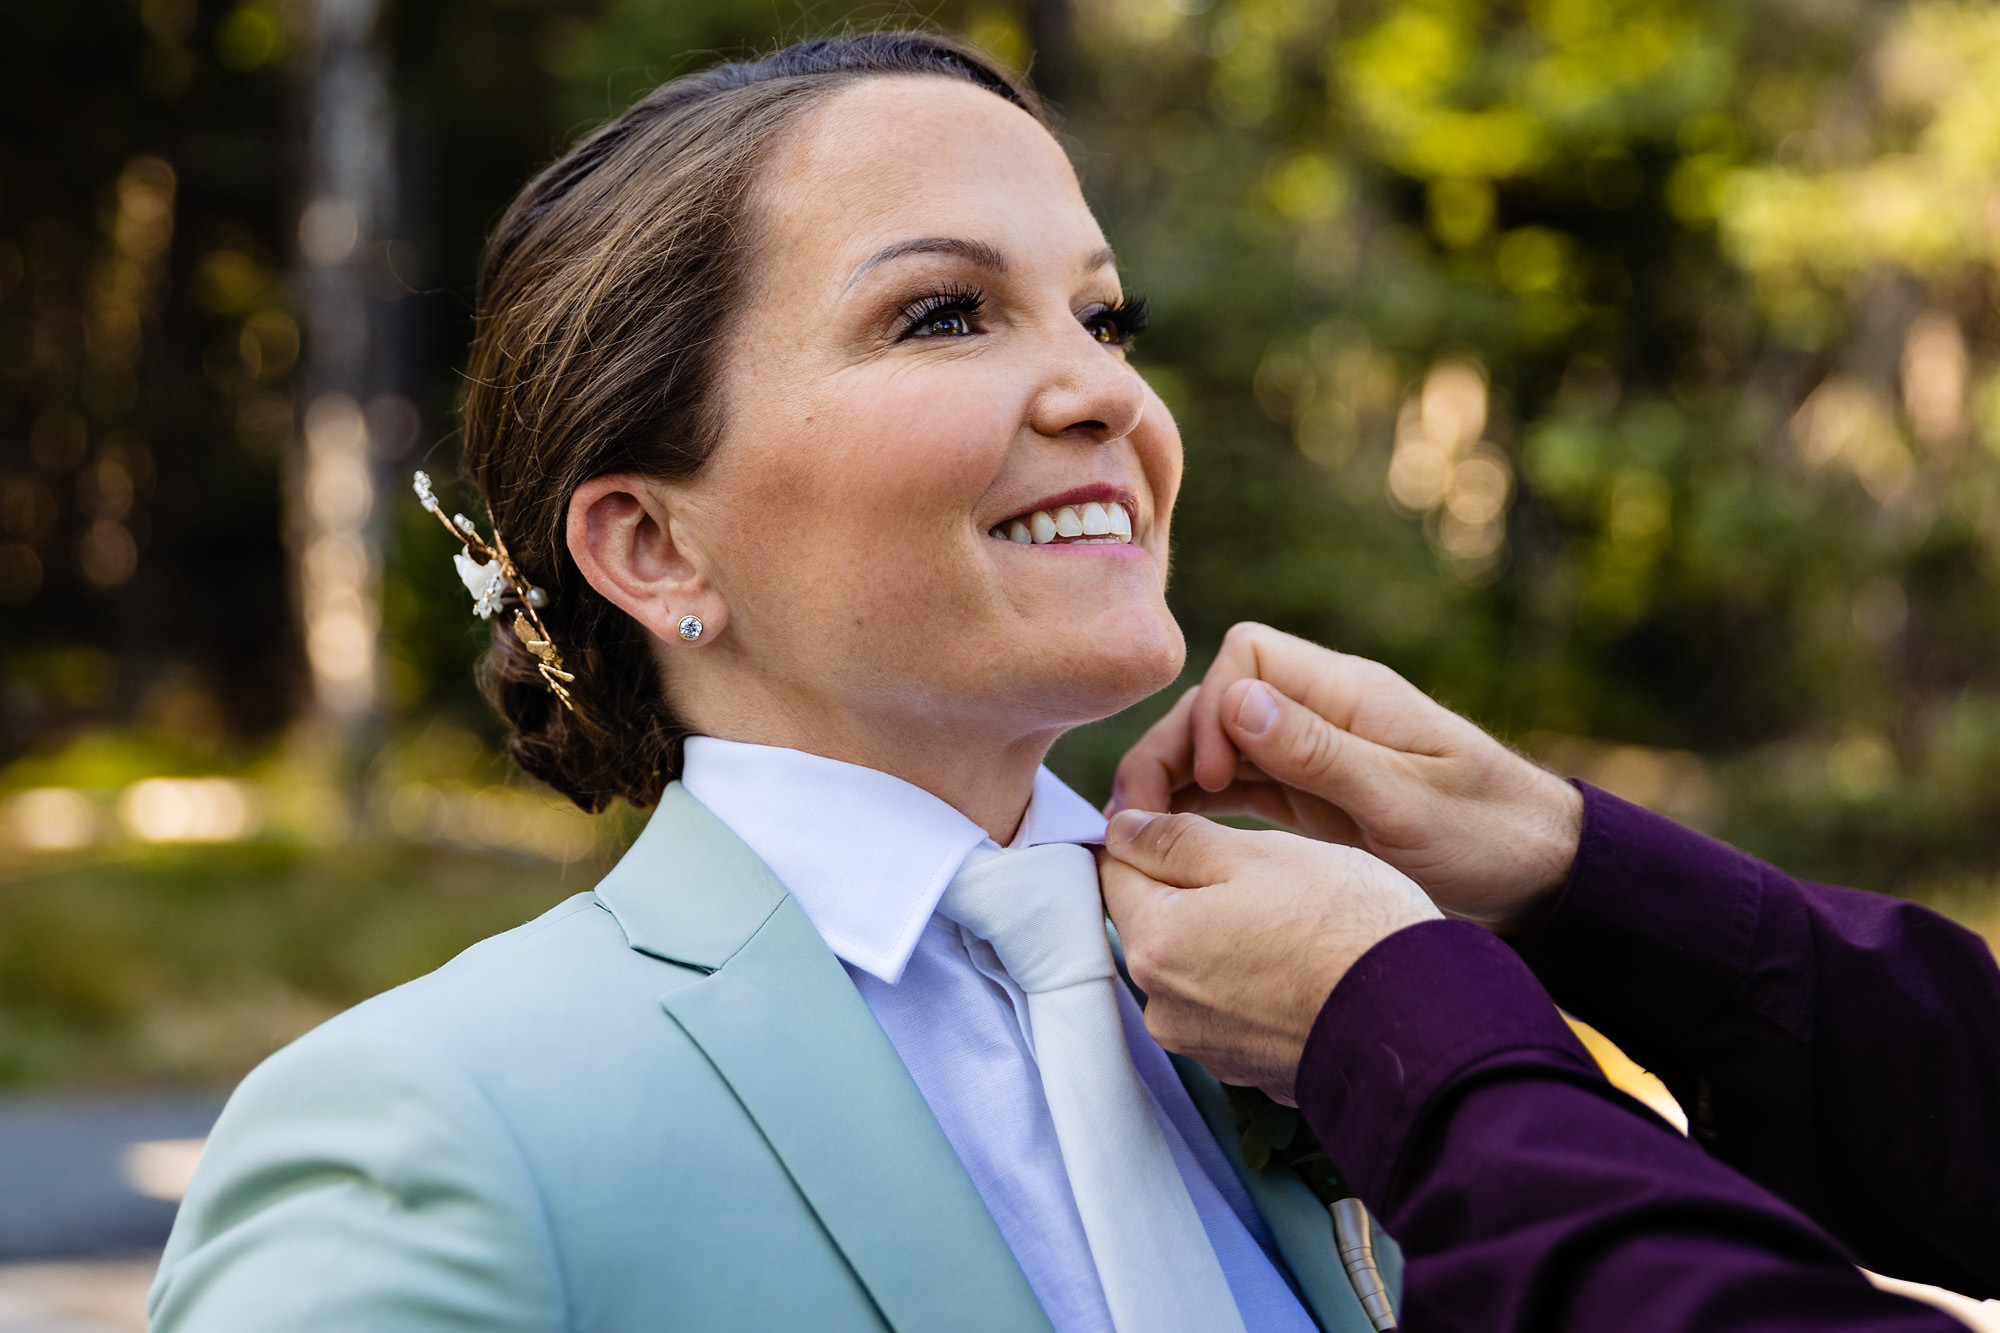 Ali gets some help with getting ready from a friend at her Acadia elopement